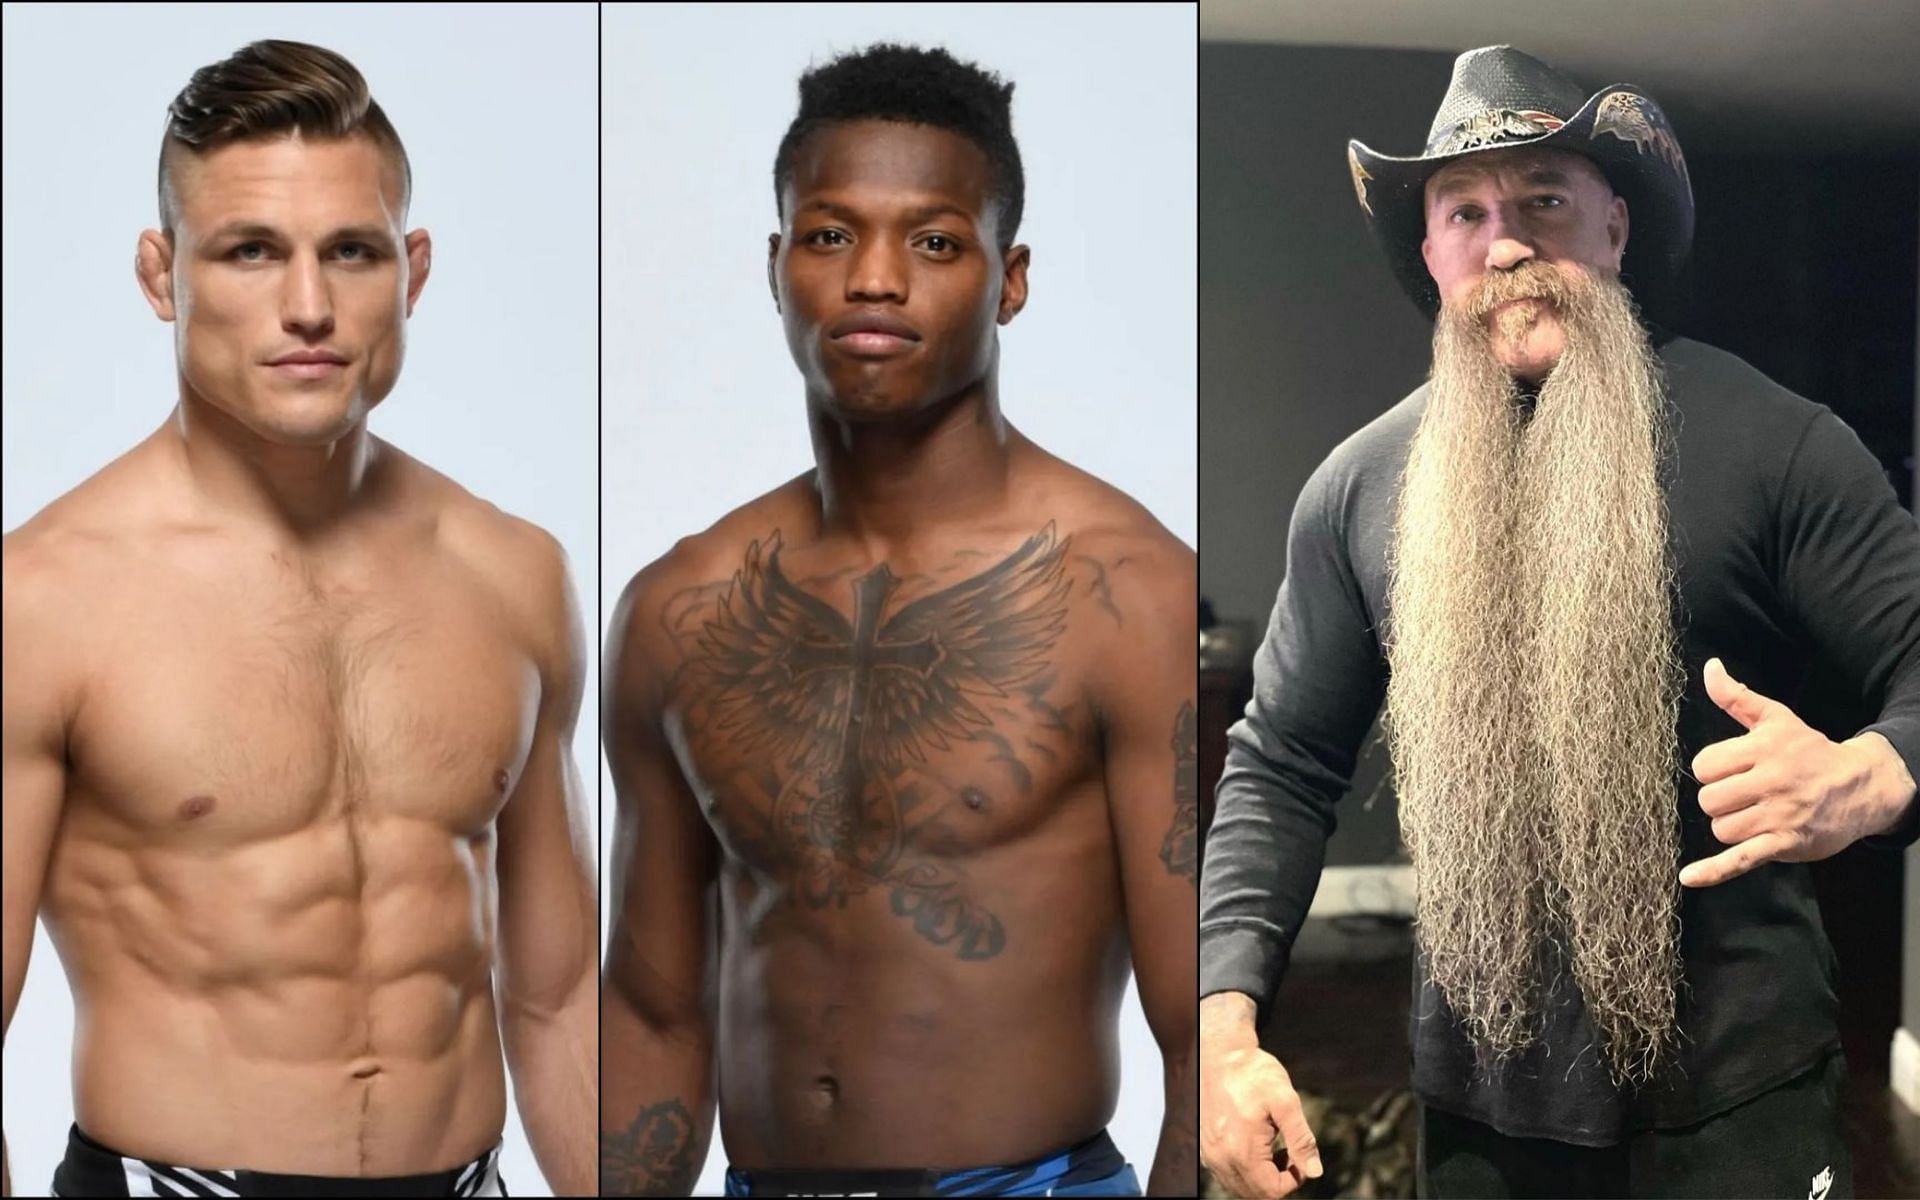 From left to right: Drew Dober, Terrance McKinney, and Mike Beltran (Image Courtesy: @drewdober and @referee_mike_beltran on Instagram)